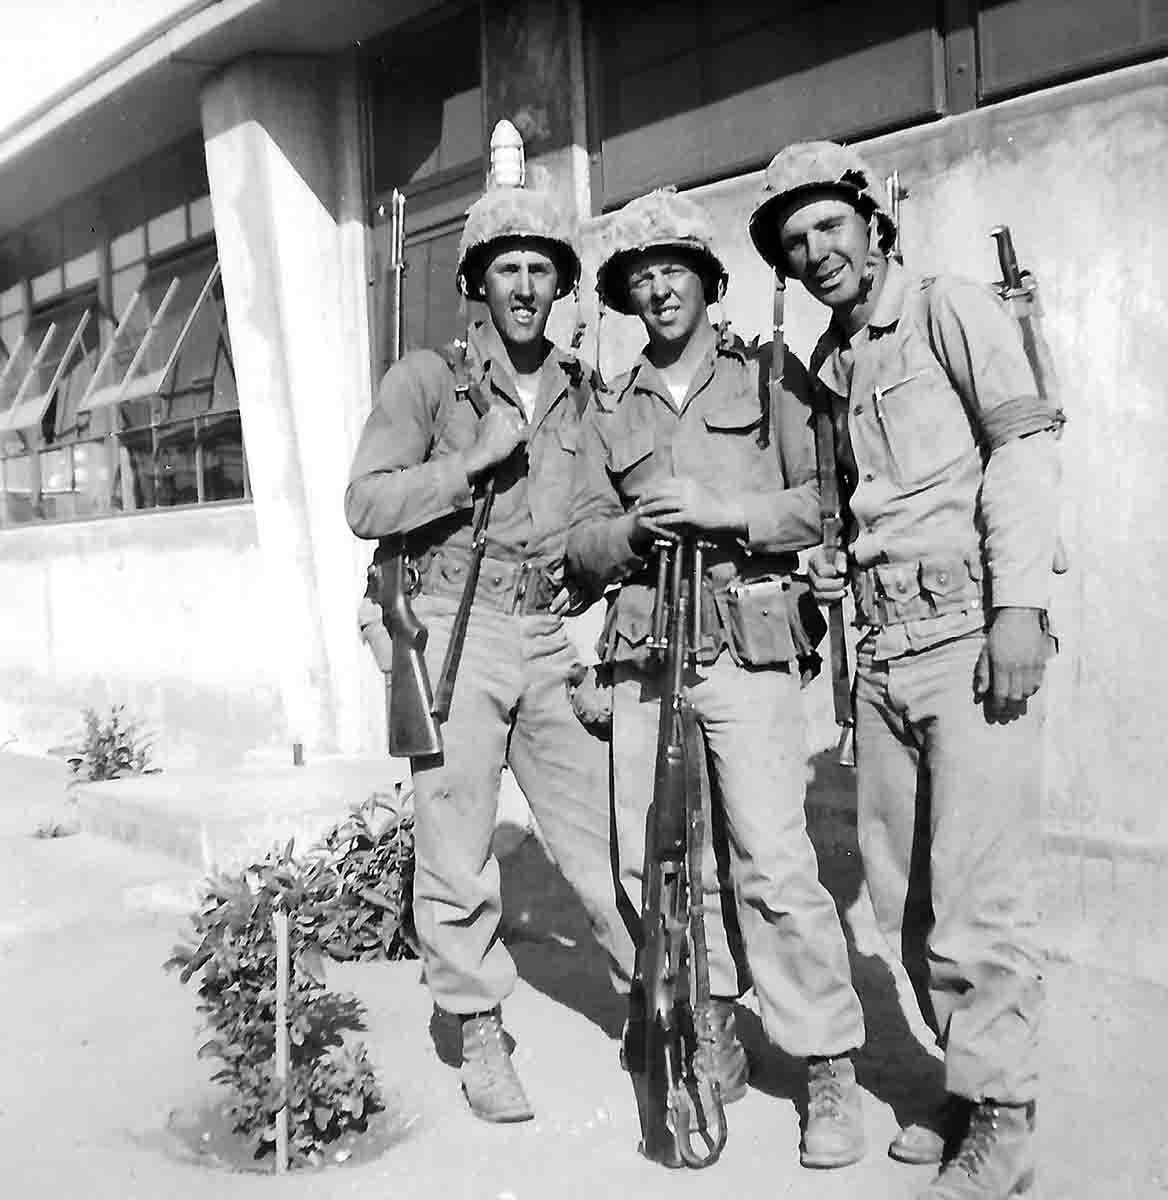 Three U.S. Marines ready to head to Korea in 1950, armed with M1 Garands and a Model 1918A2 BAR.